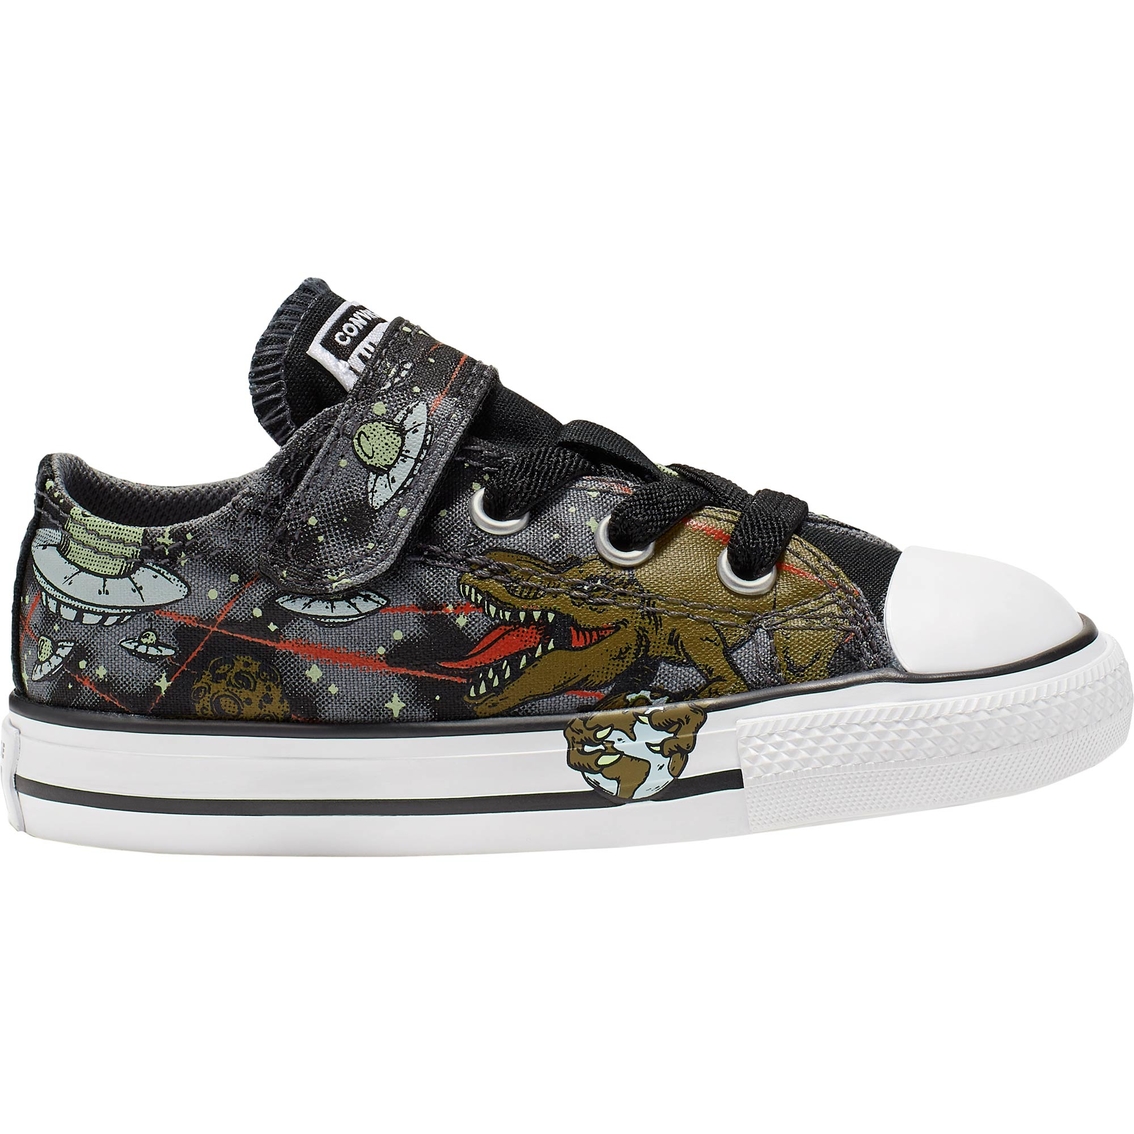 Converse Toddler Boys Chuck Taylor All Star 1V Ox Shoe - Image 2 of 3